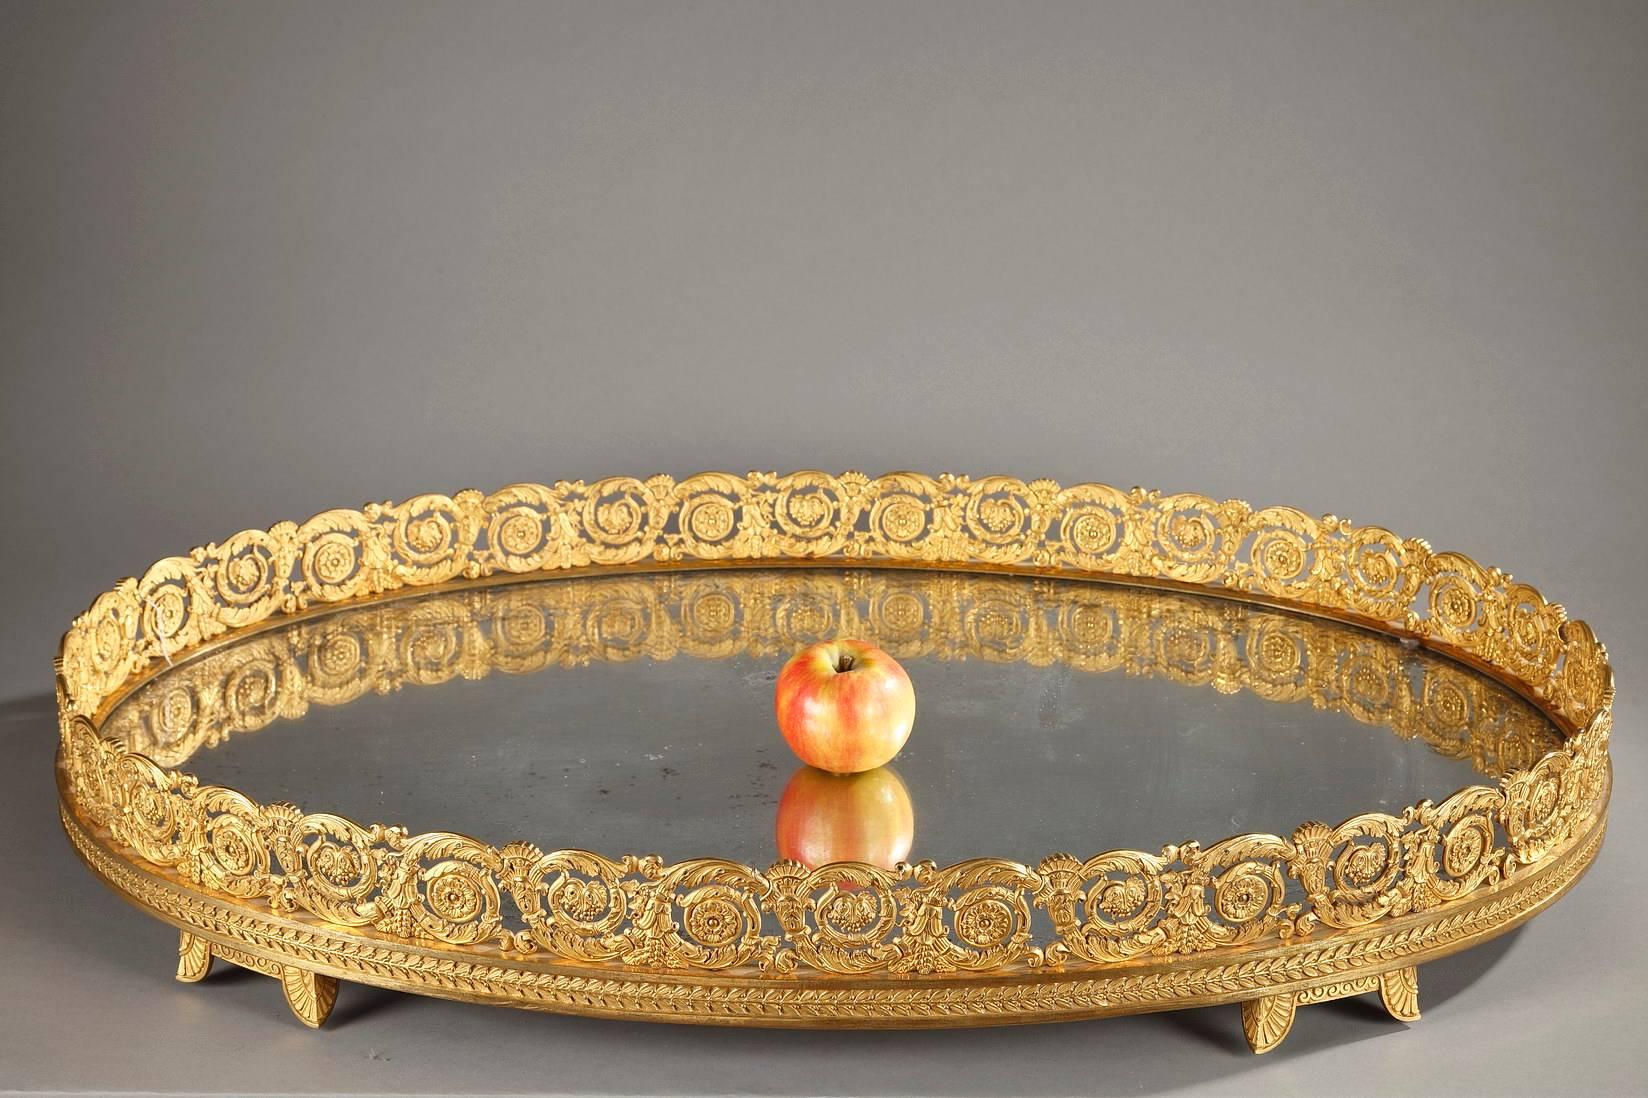 Sizable restauration centerpiece in ormolu on four scrolling feet of foliage. The oval base is covered with a mirror that is surrounded by an open work frieze. The frieze is delicately sculpted with foliated rinceau, flowers, seeds and wheat and it